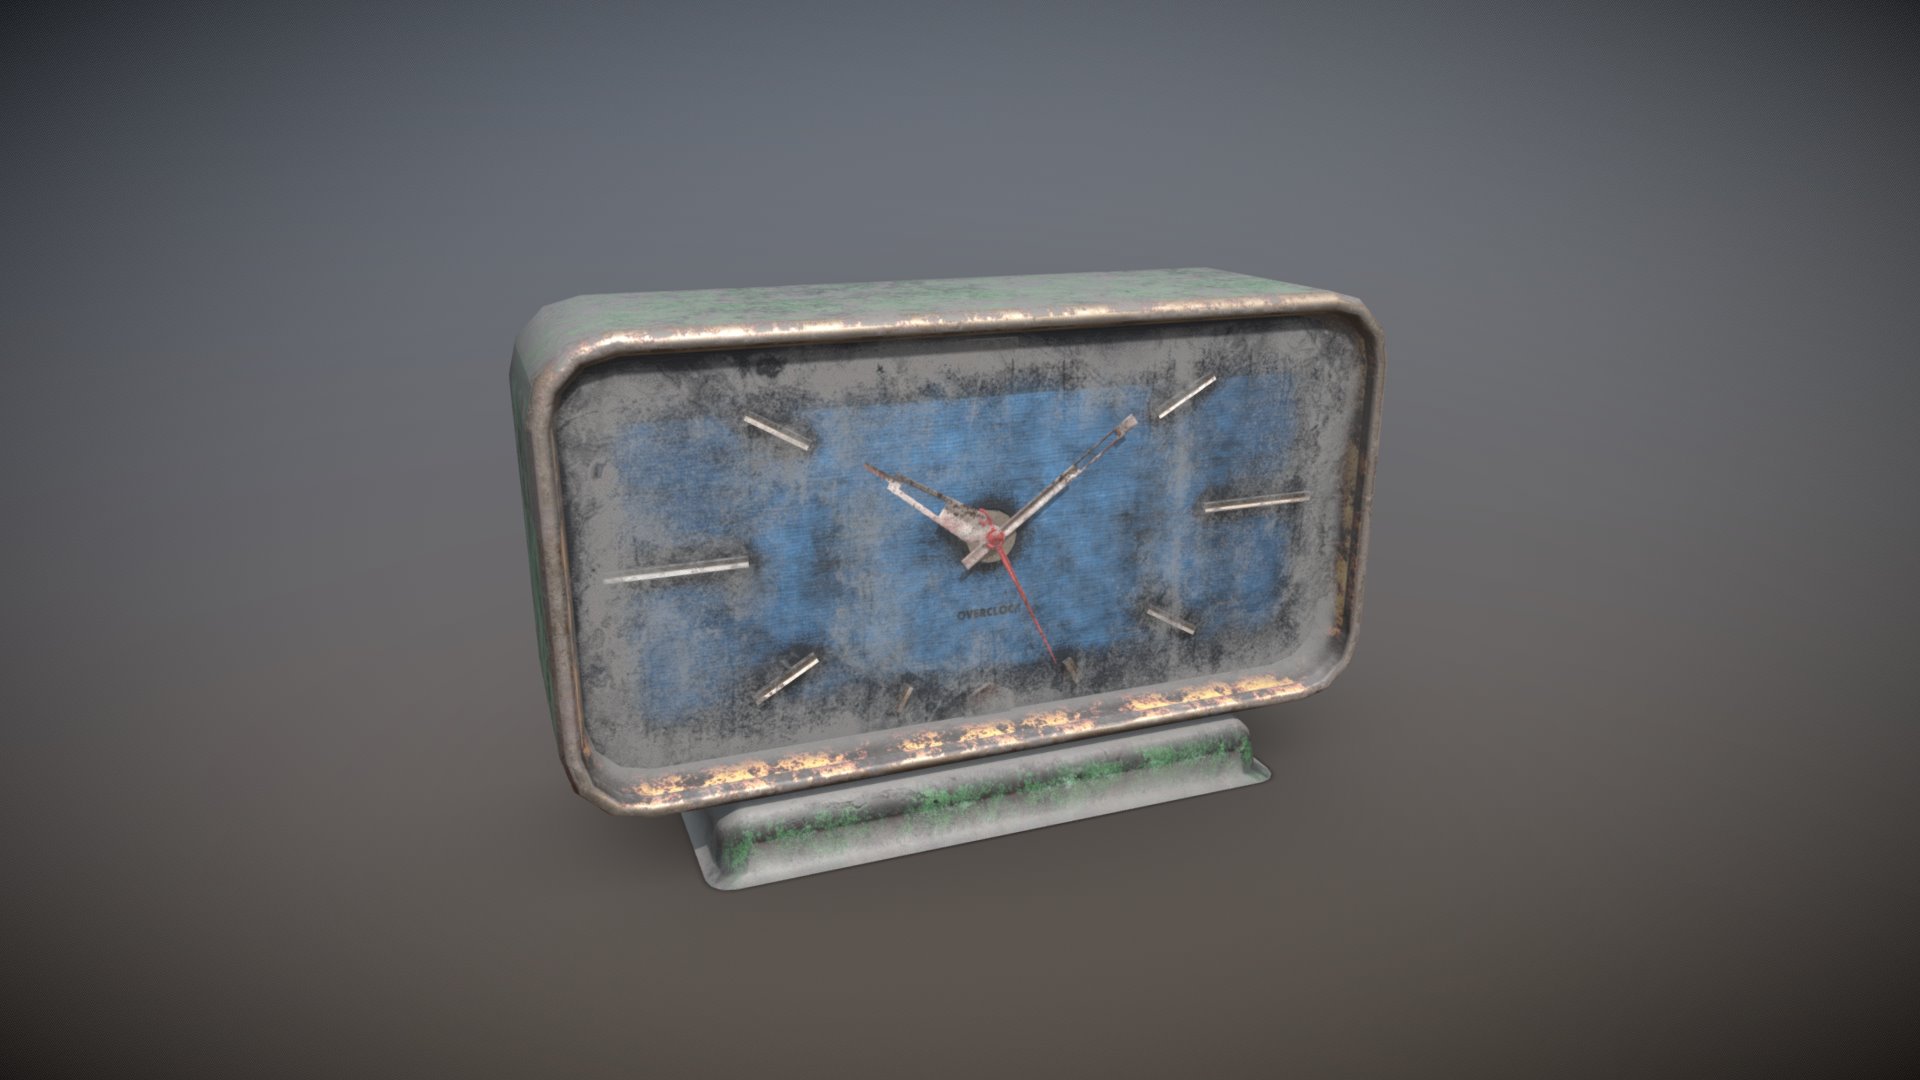 3D model Dirty desktop clock 13 of 20 - This is a 3D model of the Dirty desktop clock 13 of 20. The 3D model is about a close-up of a watch.